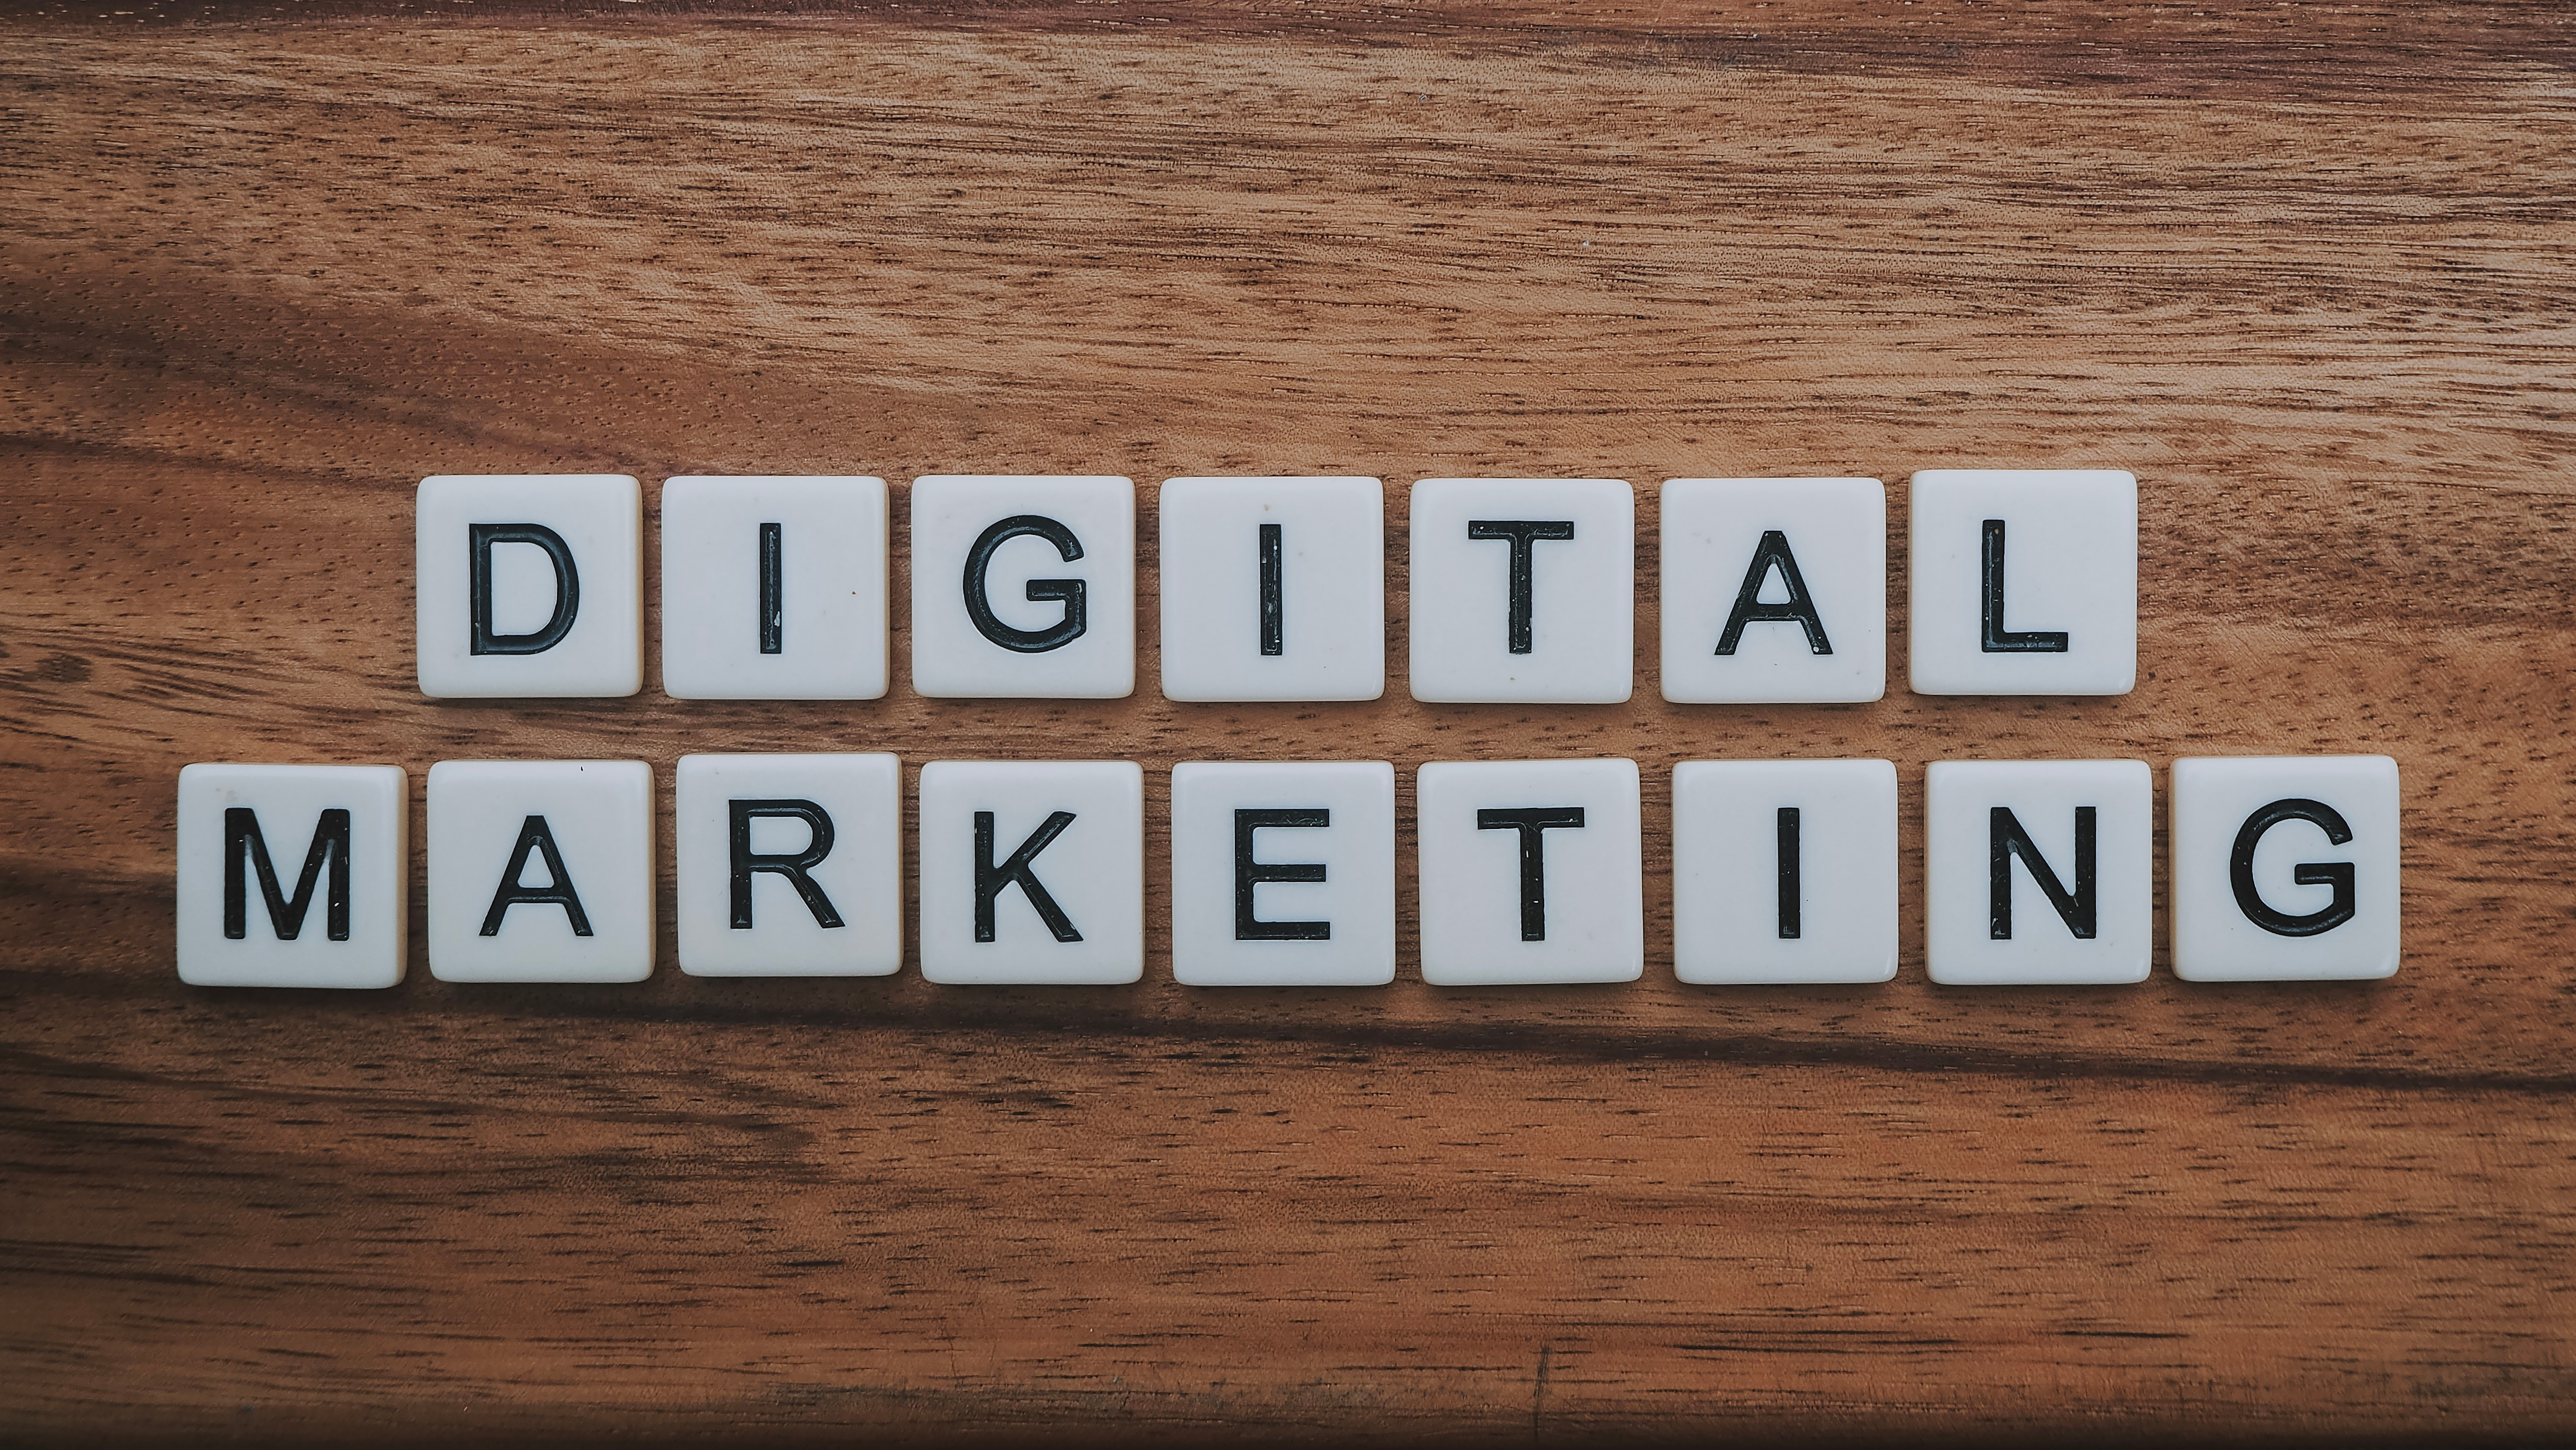 How to integrate your quiz into your digital marketing strategy? 